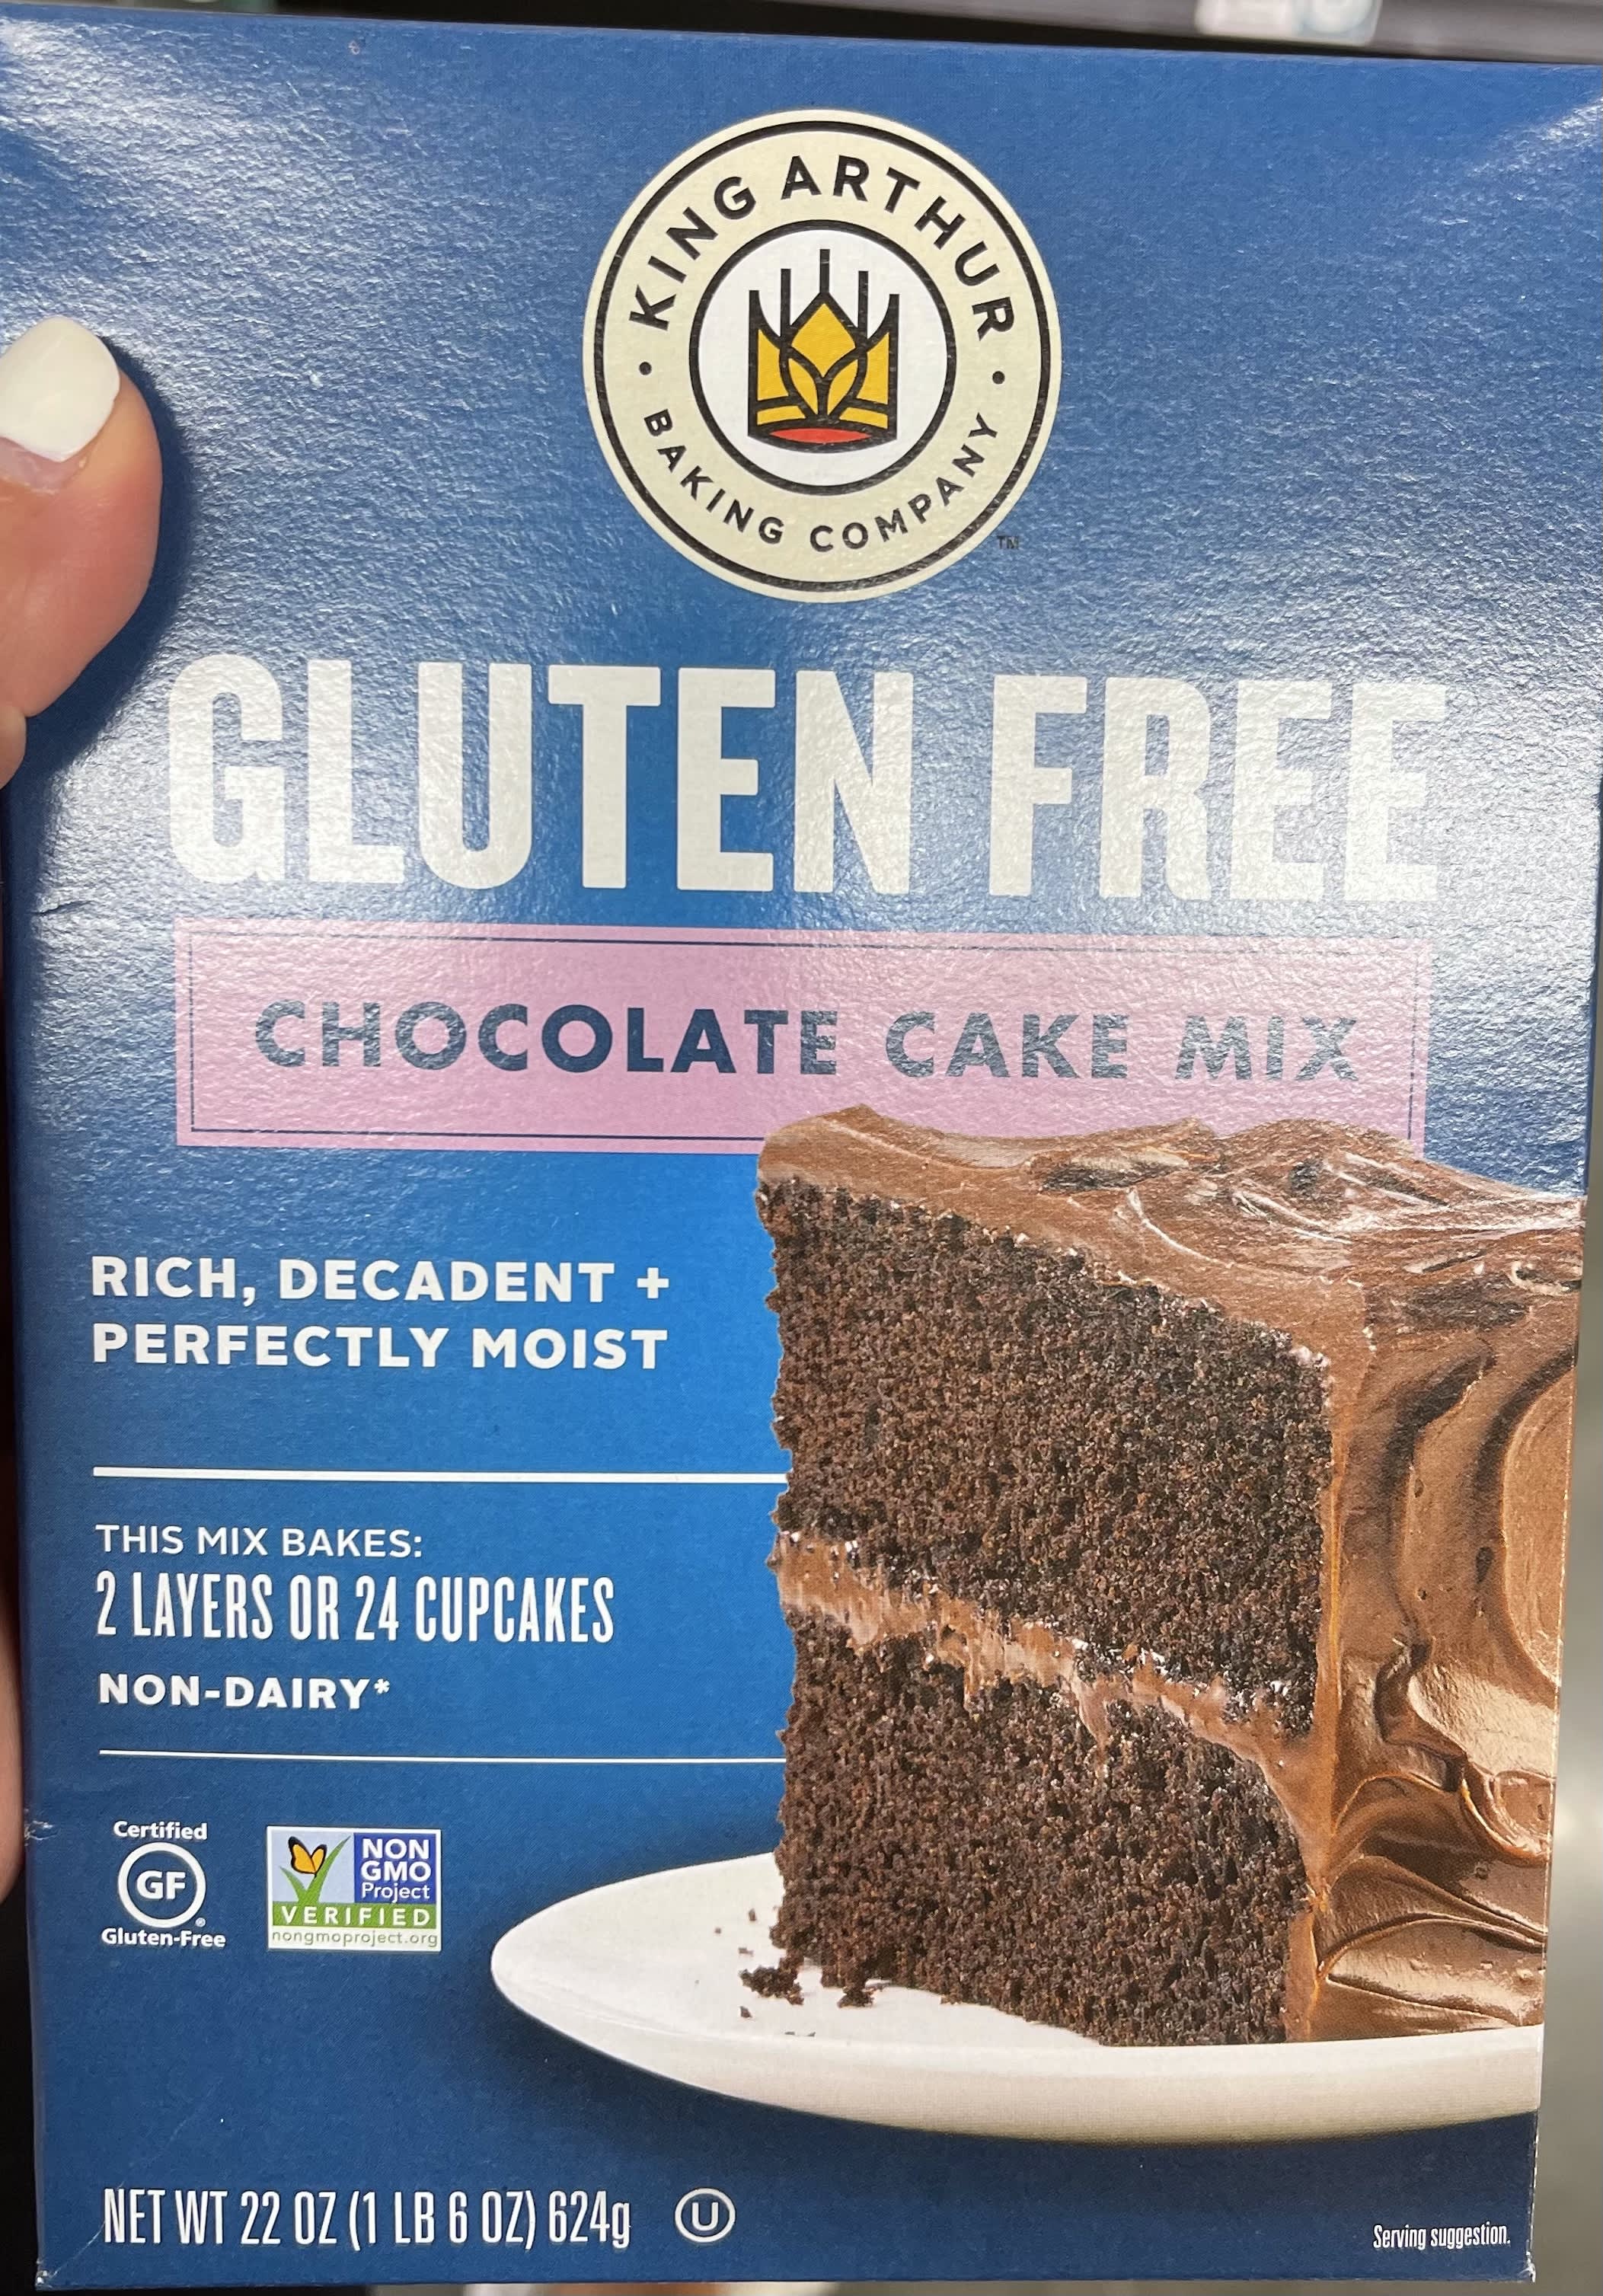 Best Boxed Cake Mix: We Tested 5 Brands to Find the Winner